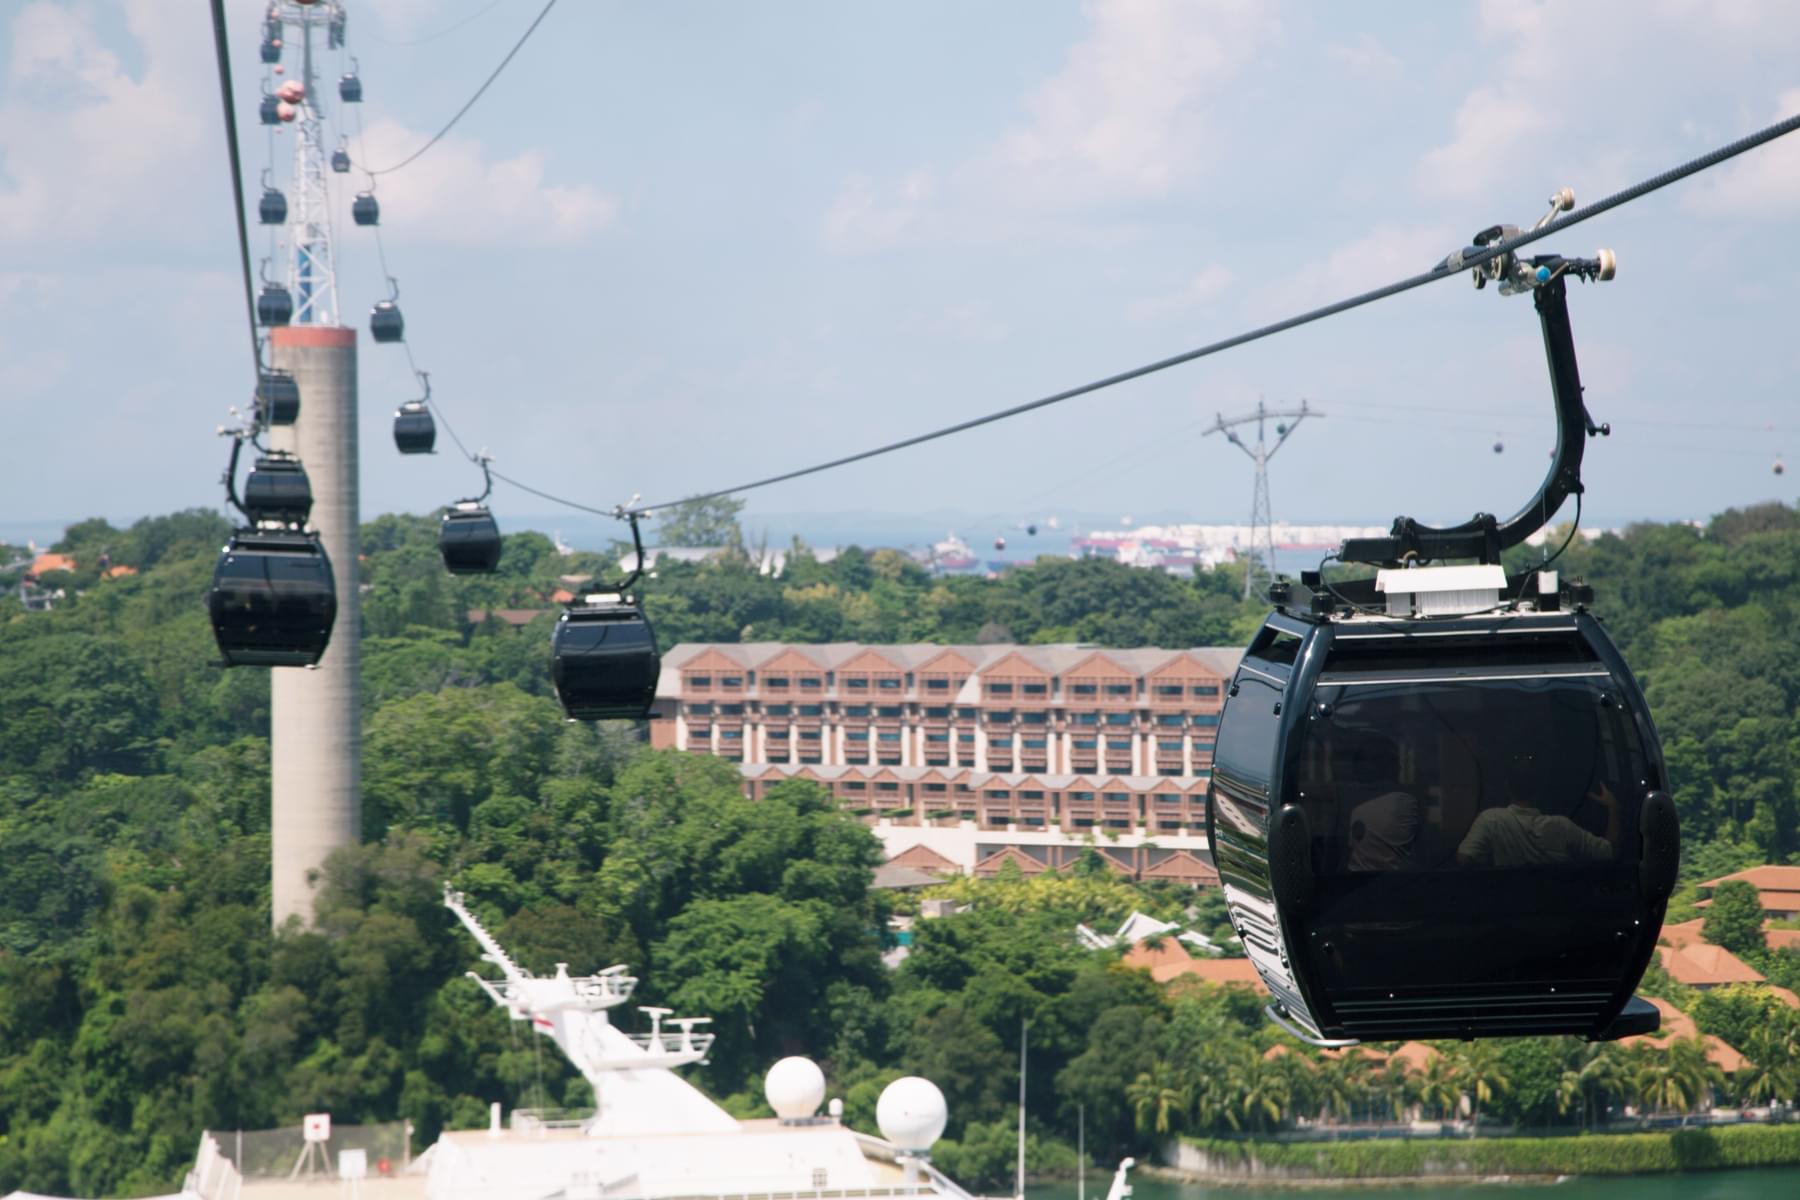 Have fun at Singapore Cable Car